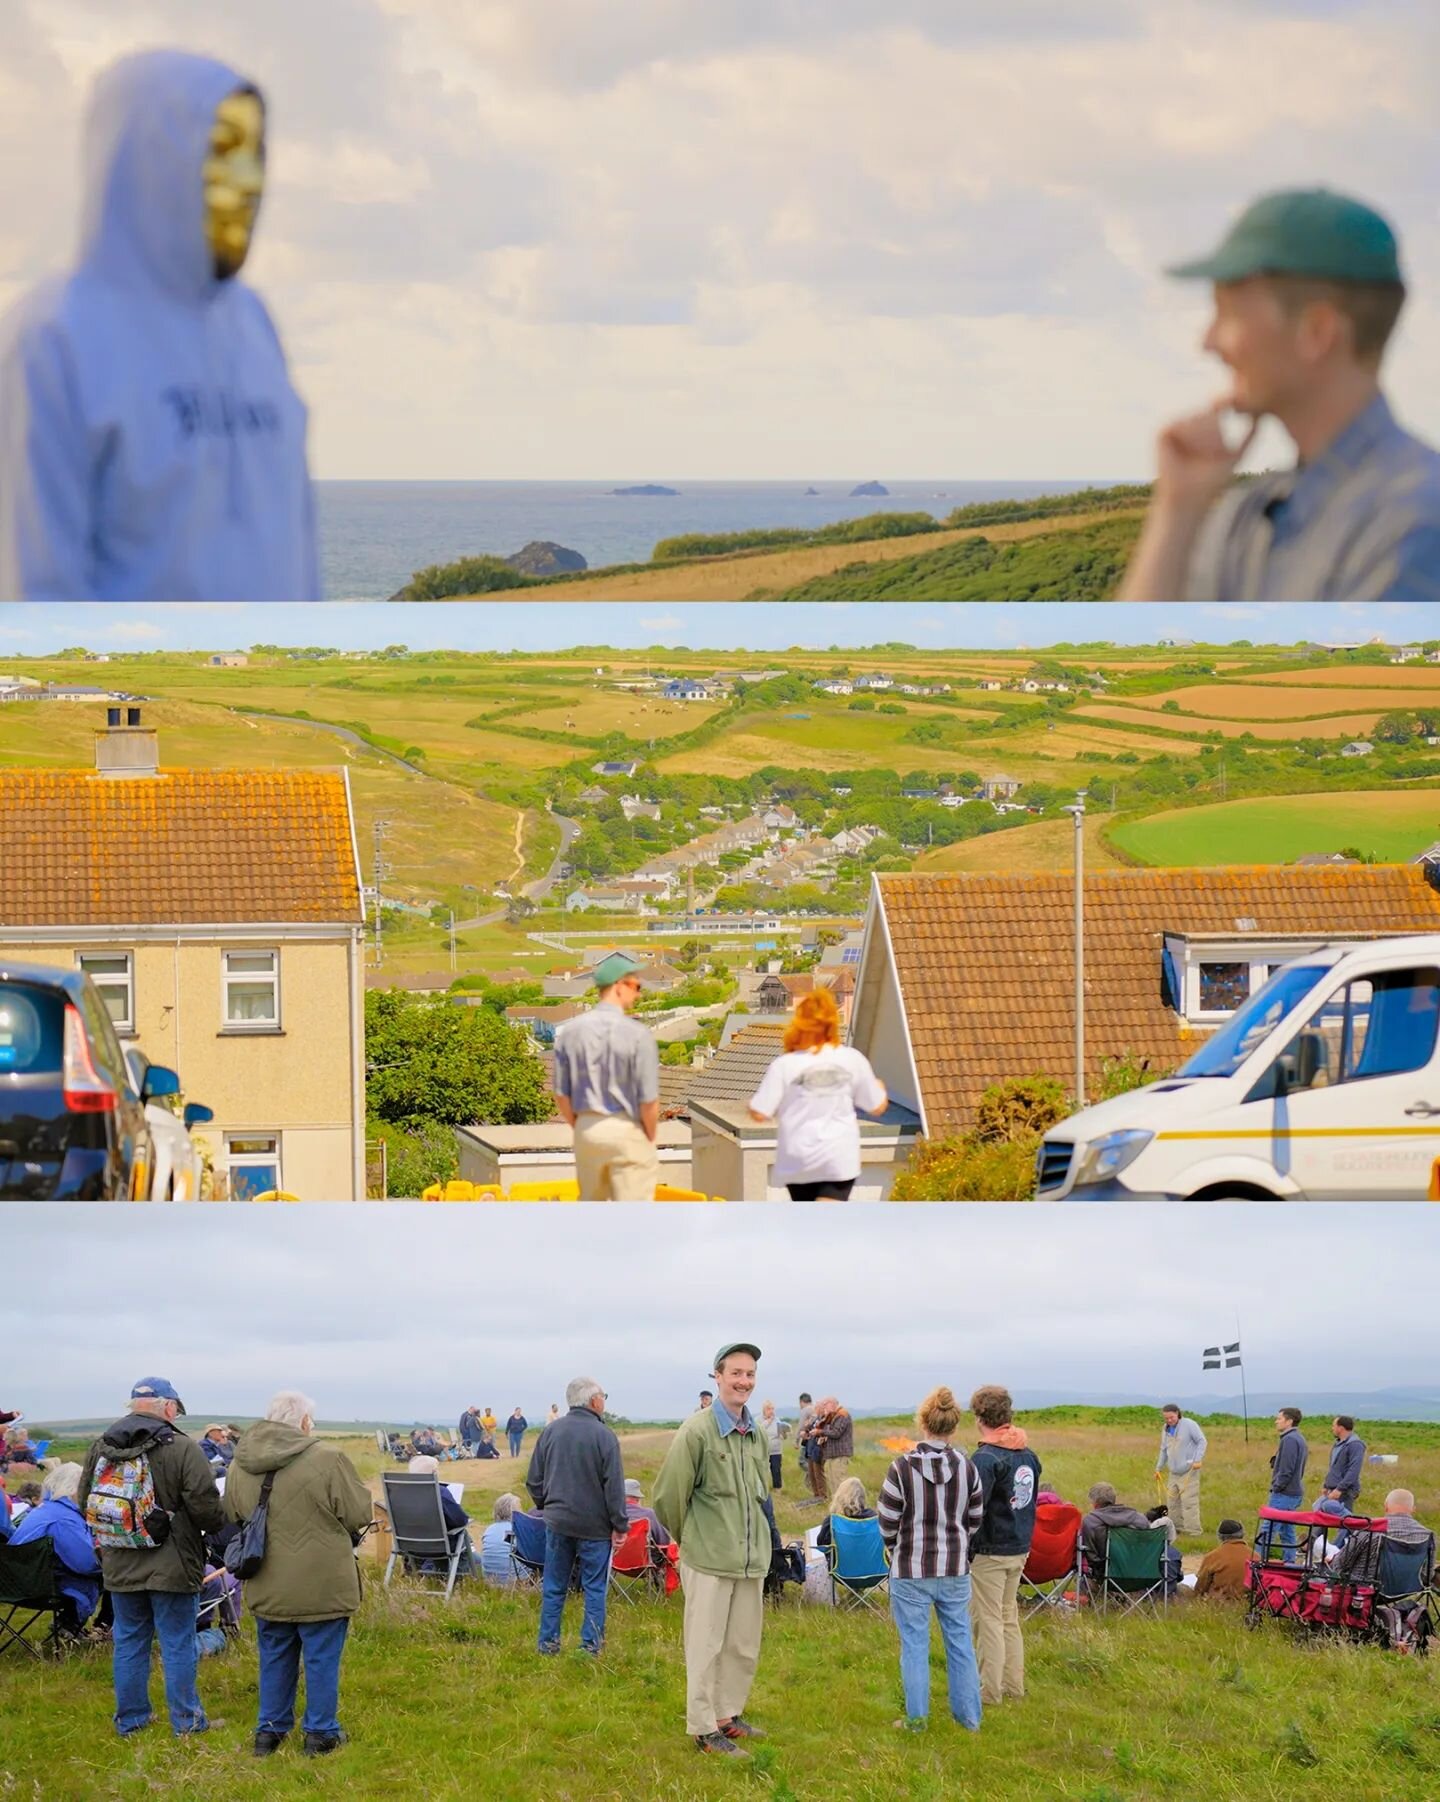 Last year @seamascarey came to me with an idea and that a group of Americans from Mineral Point, Wisconsin were coming to visit Cornwall... And after a few wild goose chases and 10 months later here we are!

This has been such an amazing project to h